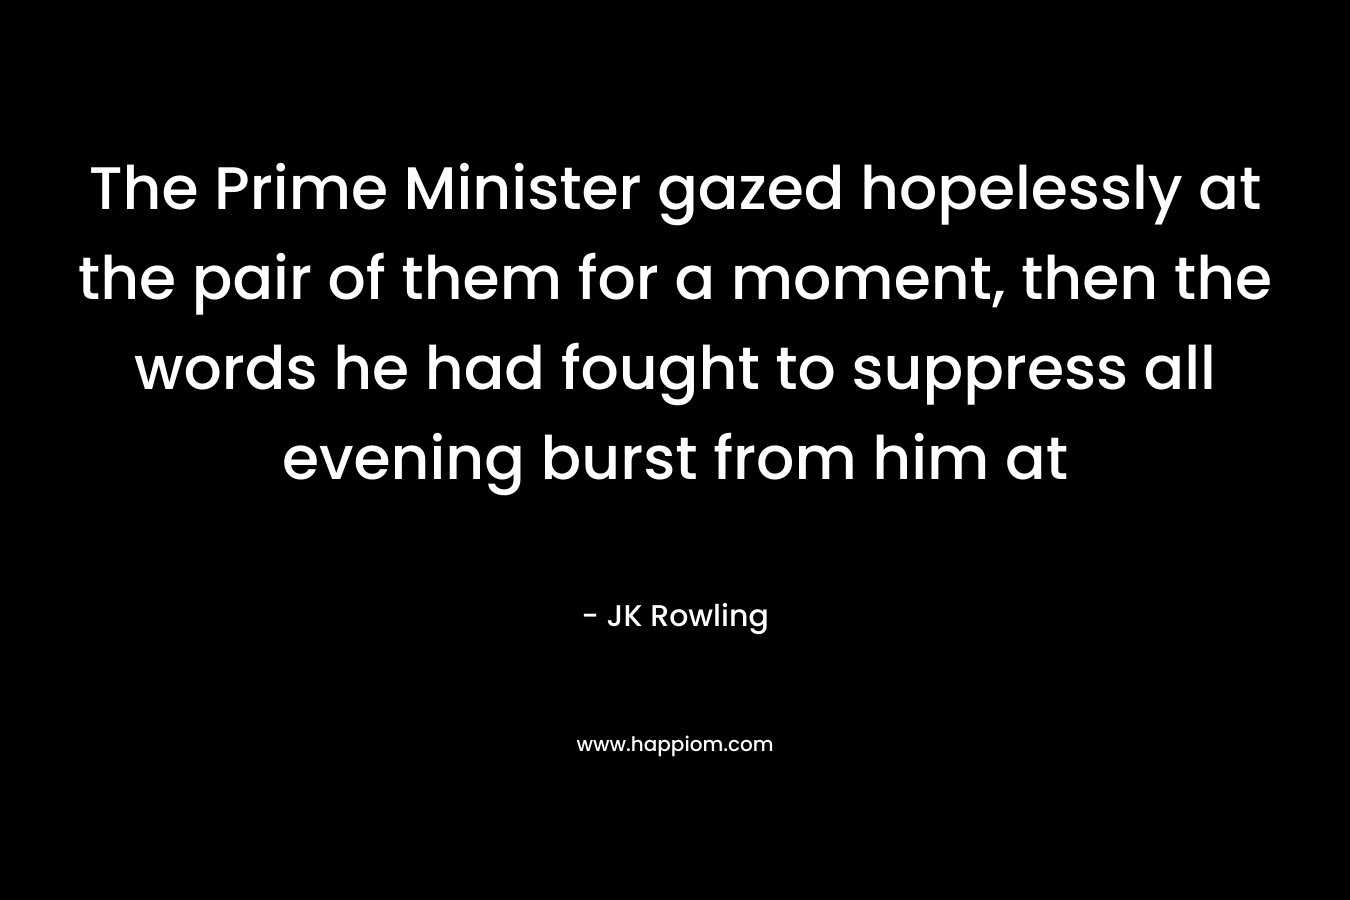 The Prime Minister gazed hopelessly at the pair of them for a moment, then the words he had fought to suppress all evening burst from him at – JK Rowling